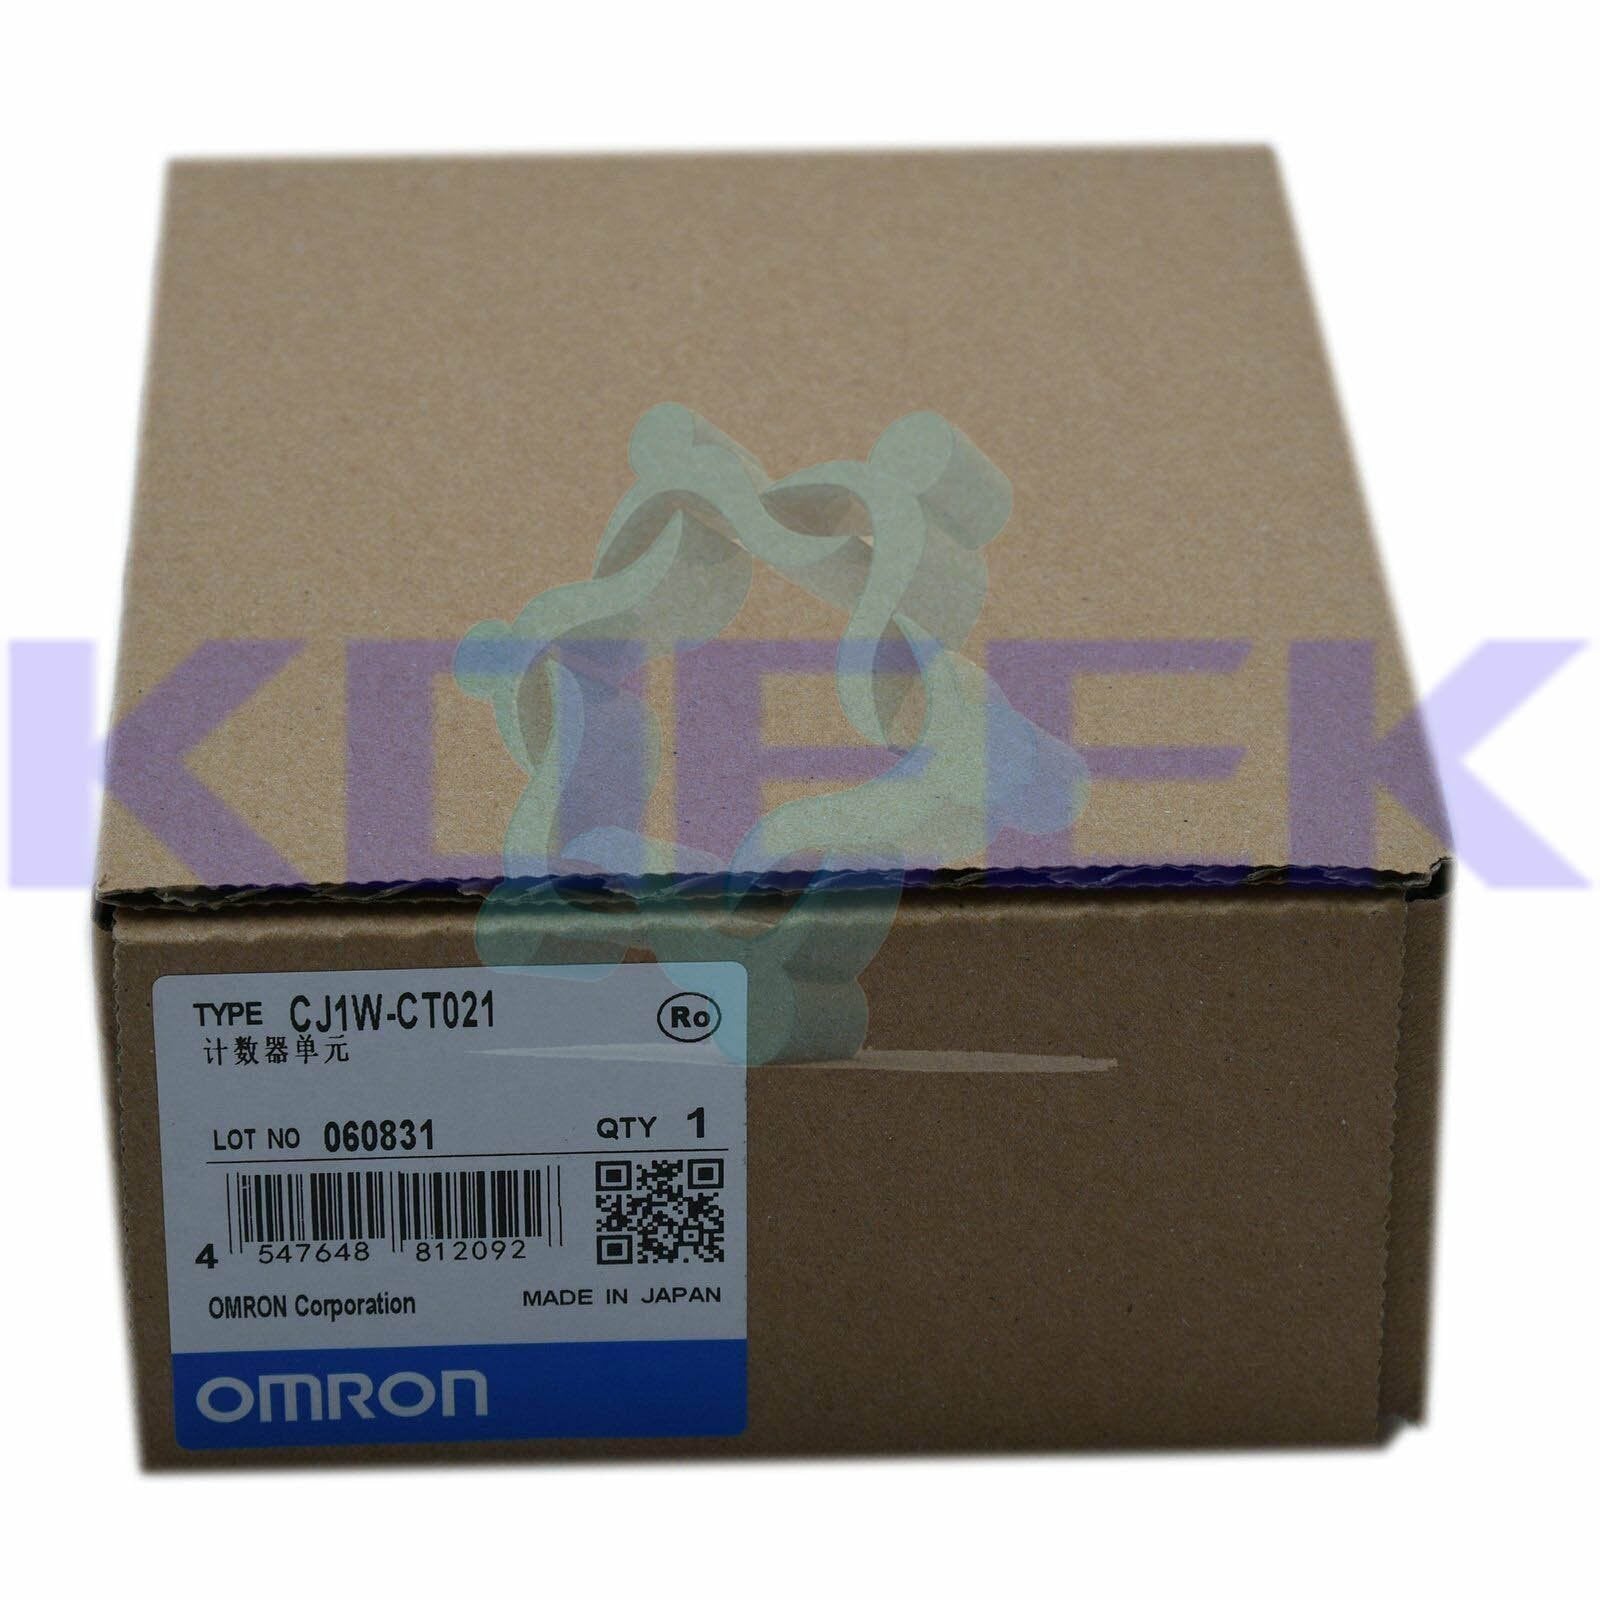 CJ1W-CT021 KOEED 201-500, 80%, import_2020_10_10_031751, Omron, Other